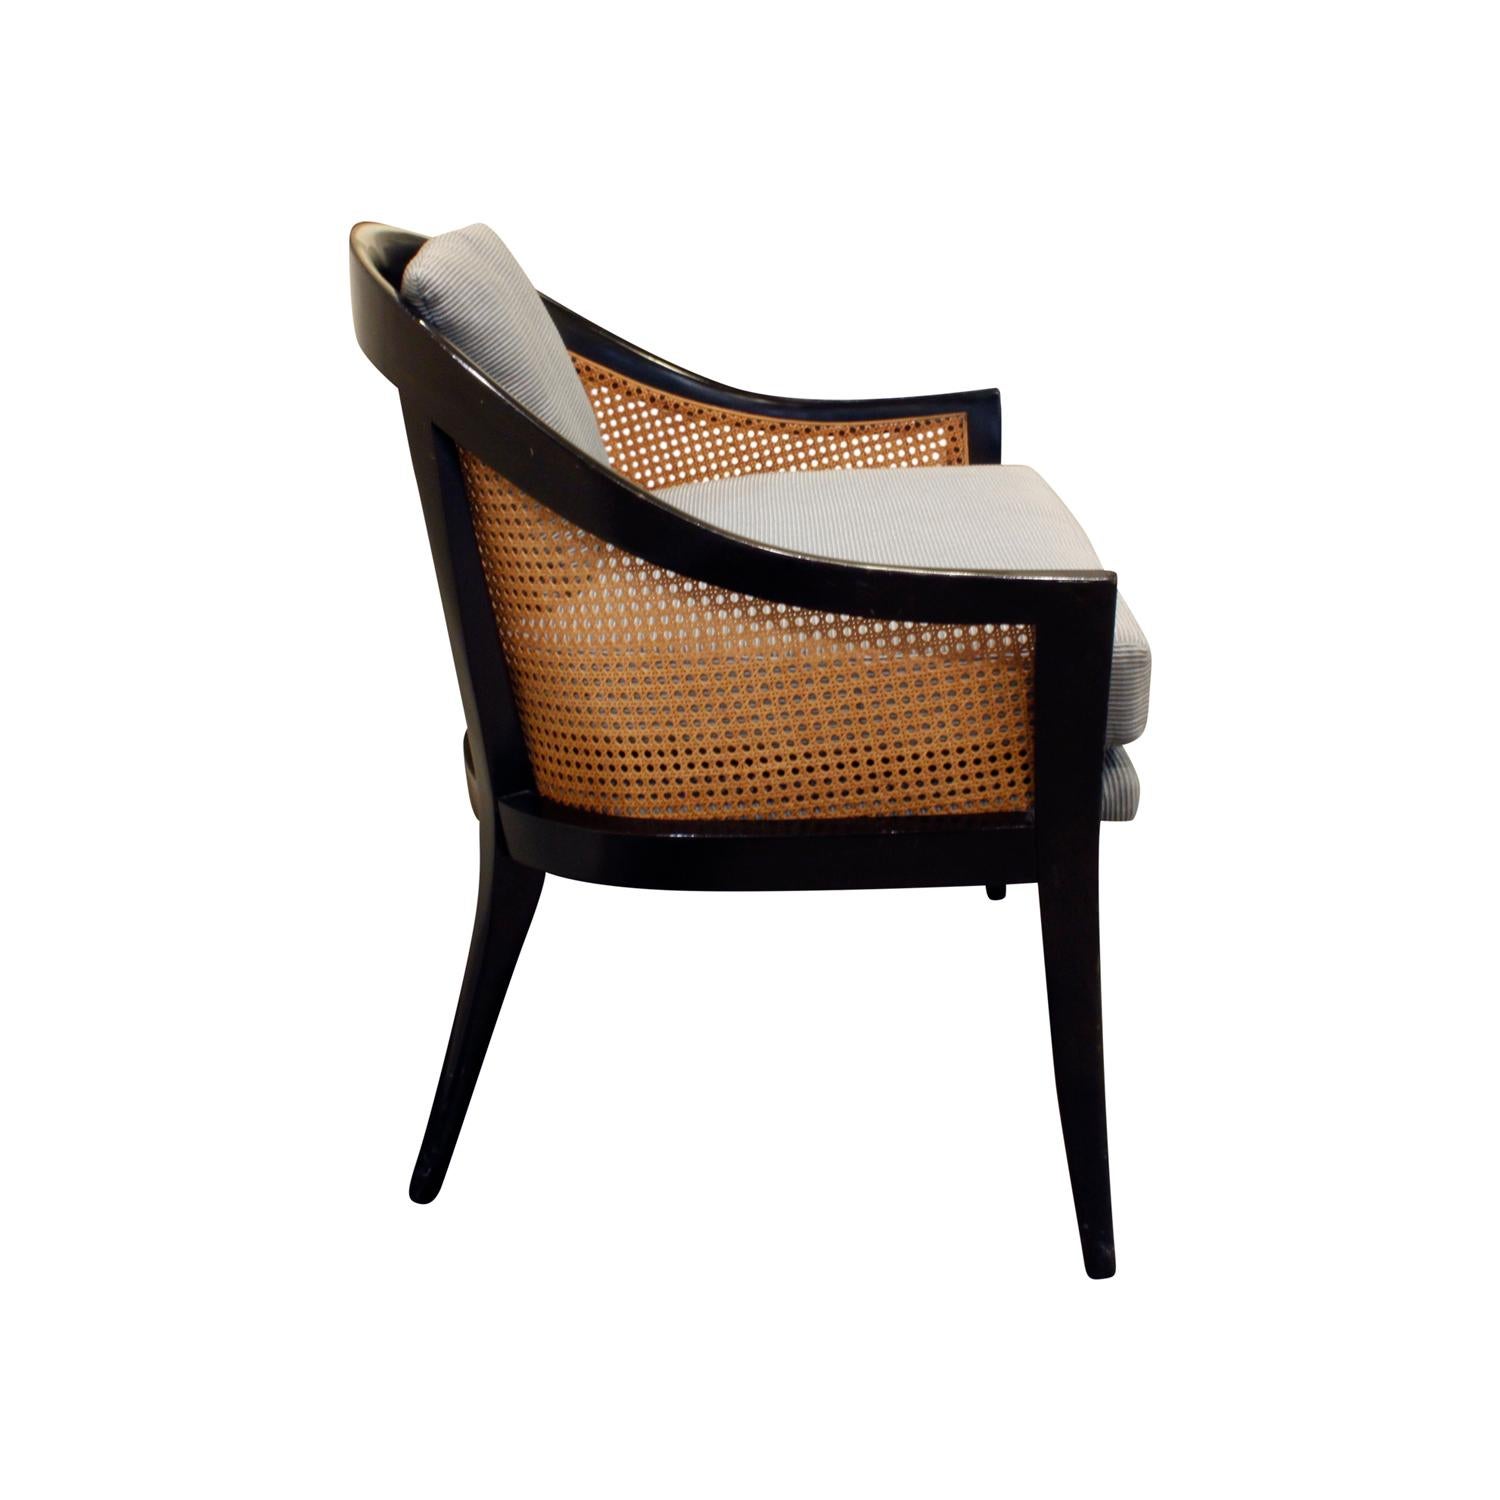 American Harvey Probber Elegant Pair of Lounge Chairs with Caned Backs and Sides, 1950s